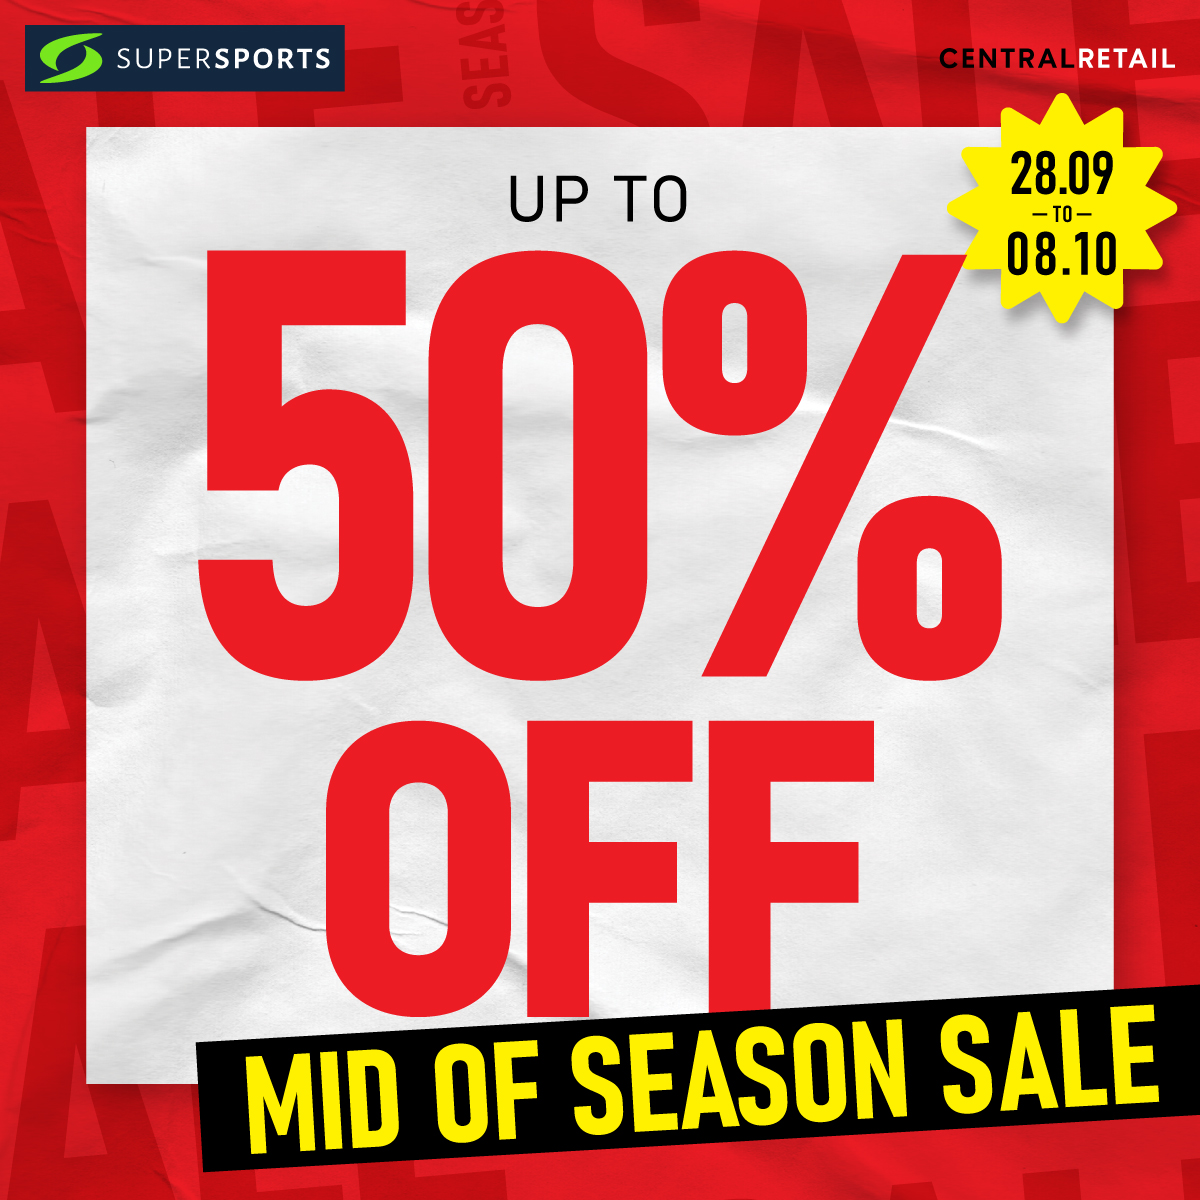 MID OF SEASON SALE- SALE UP TO 50% MANY PRODUCTS AT SUPERSPORTS🎉🎉